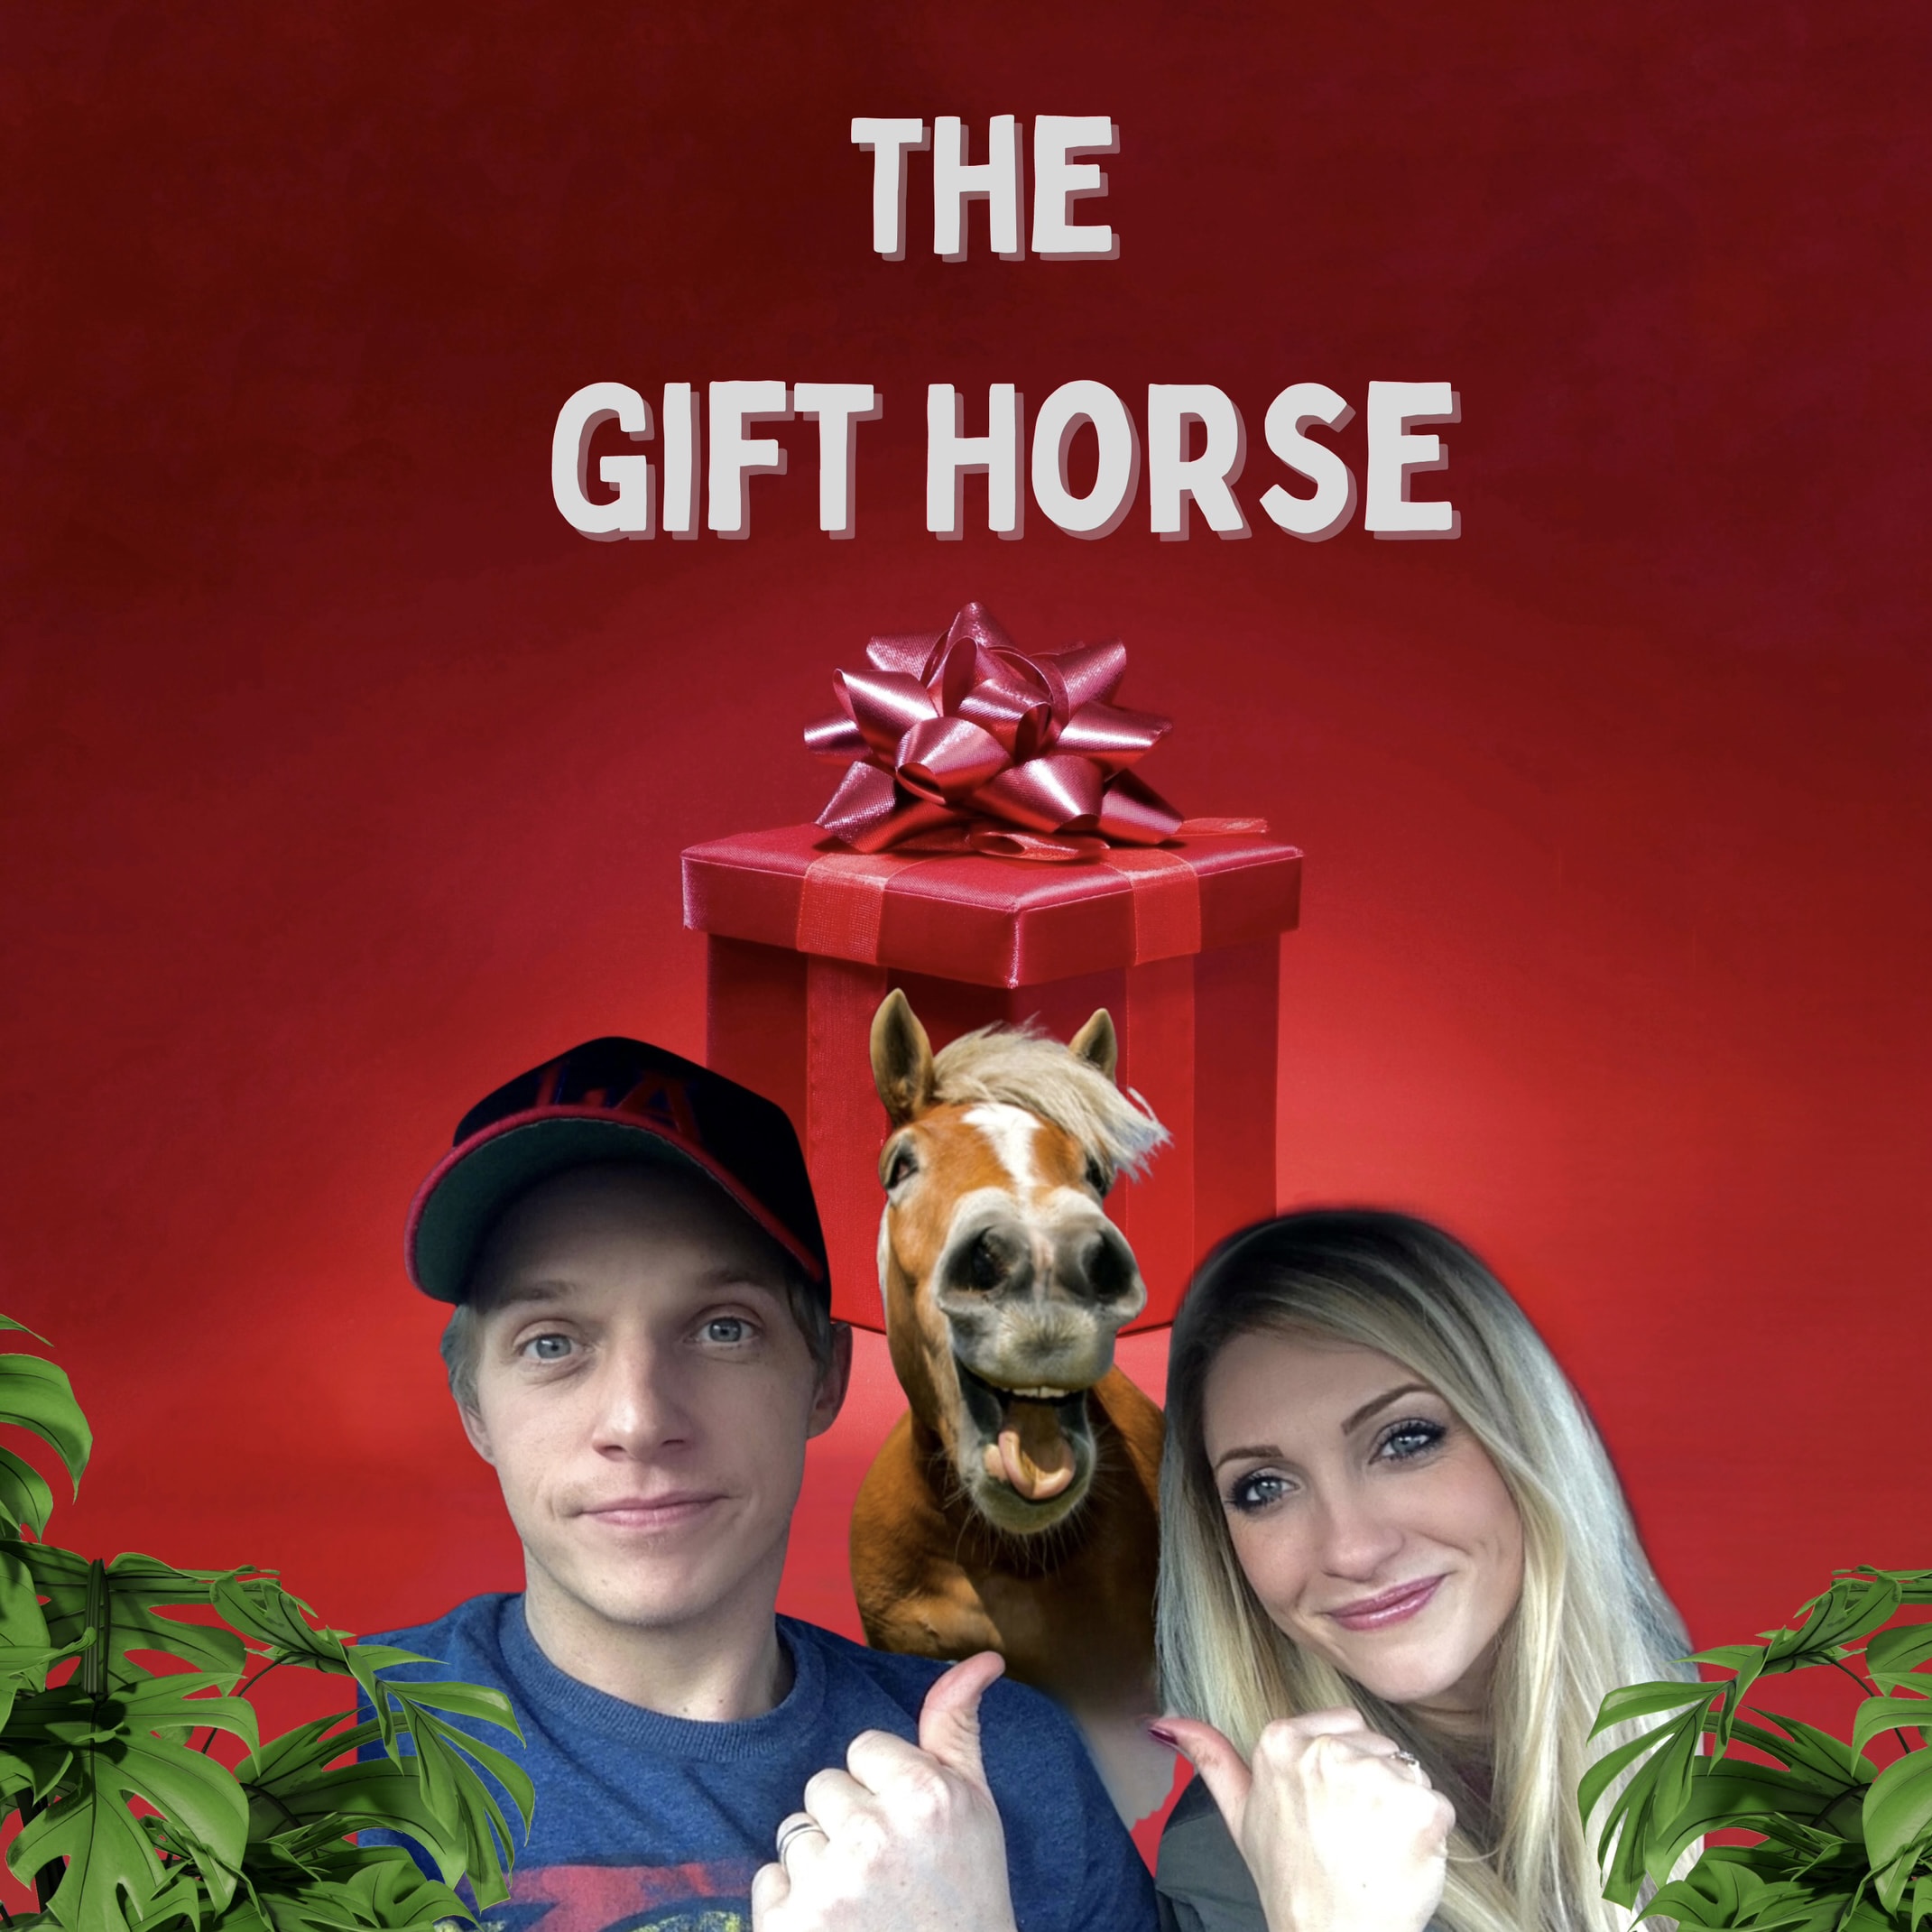 The Gift Horse